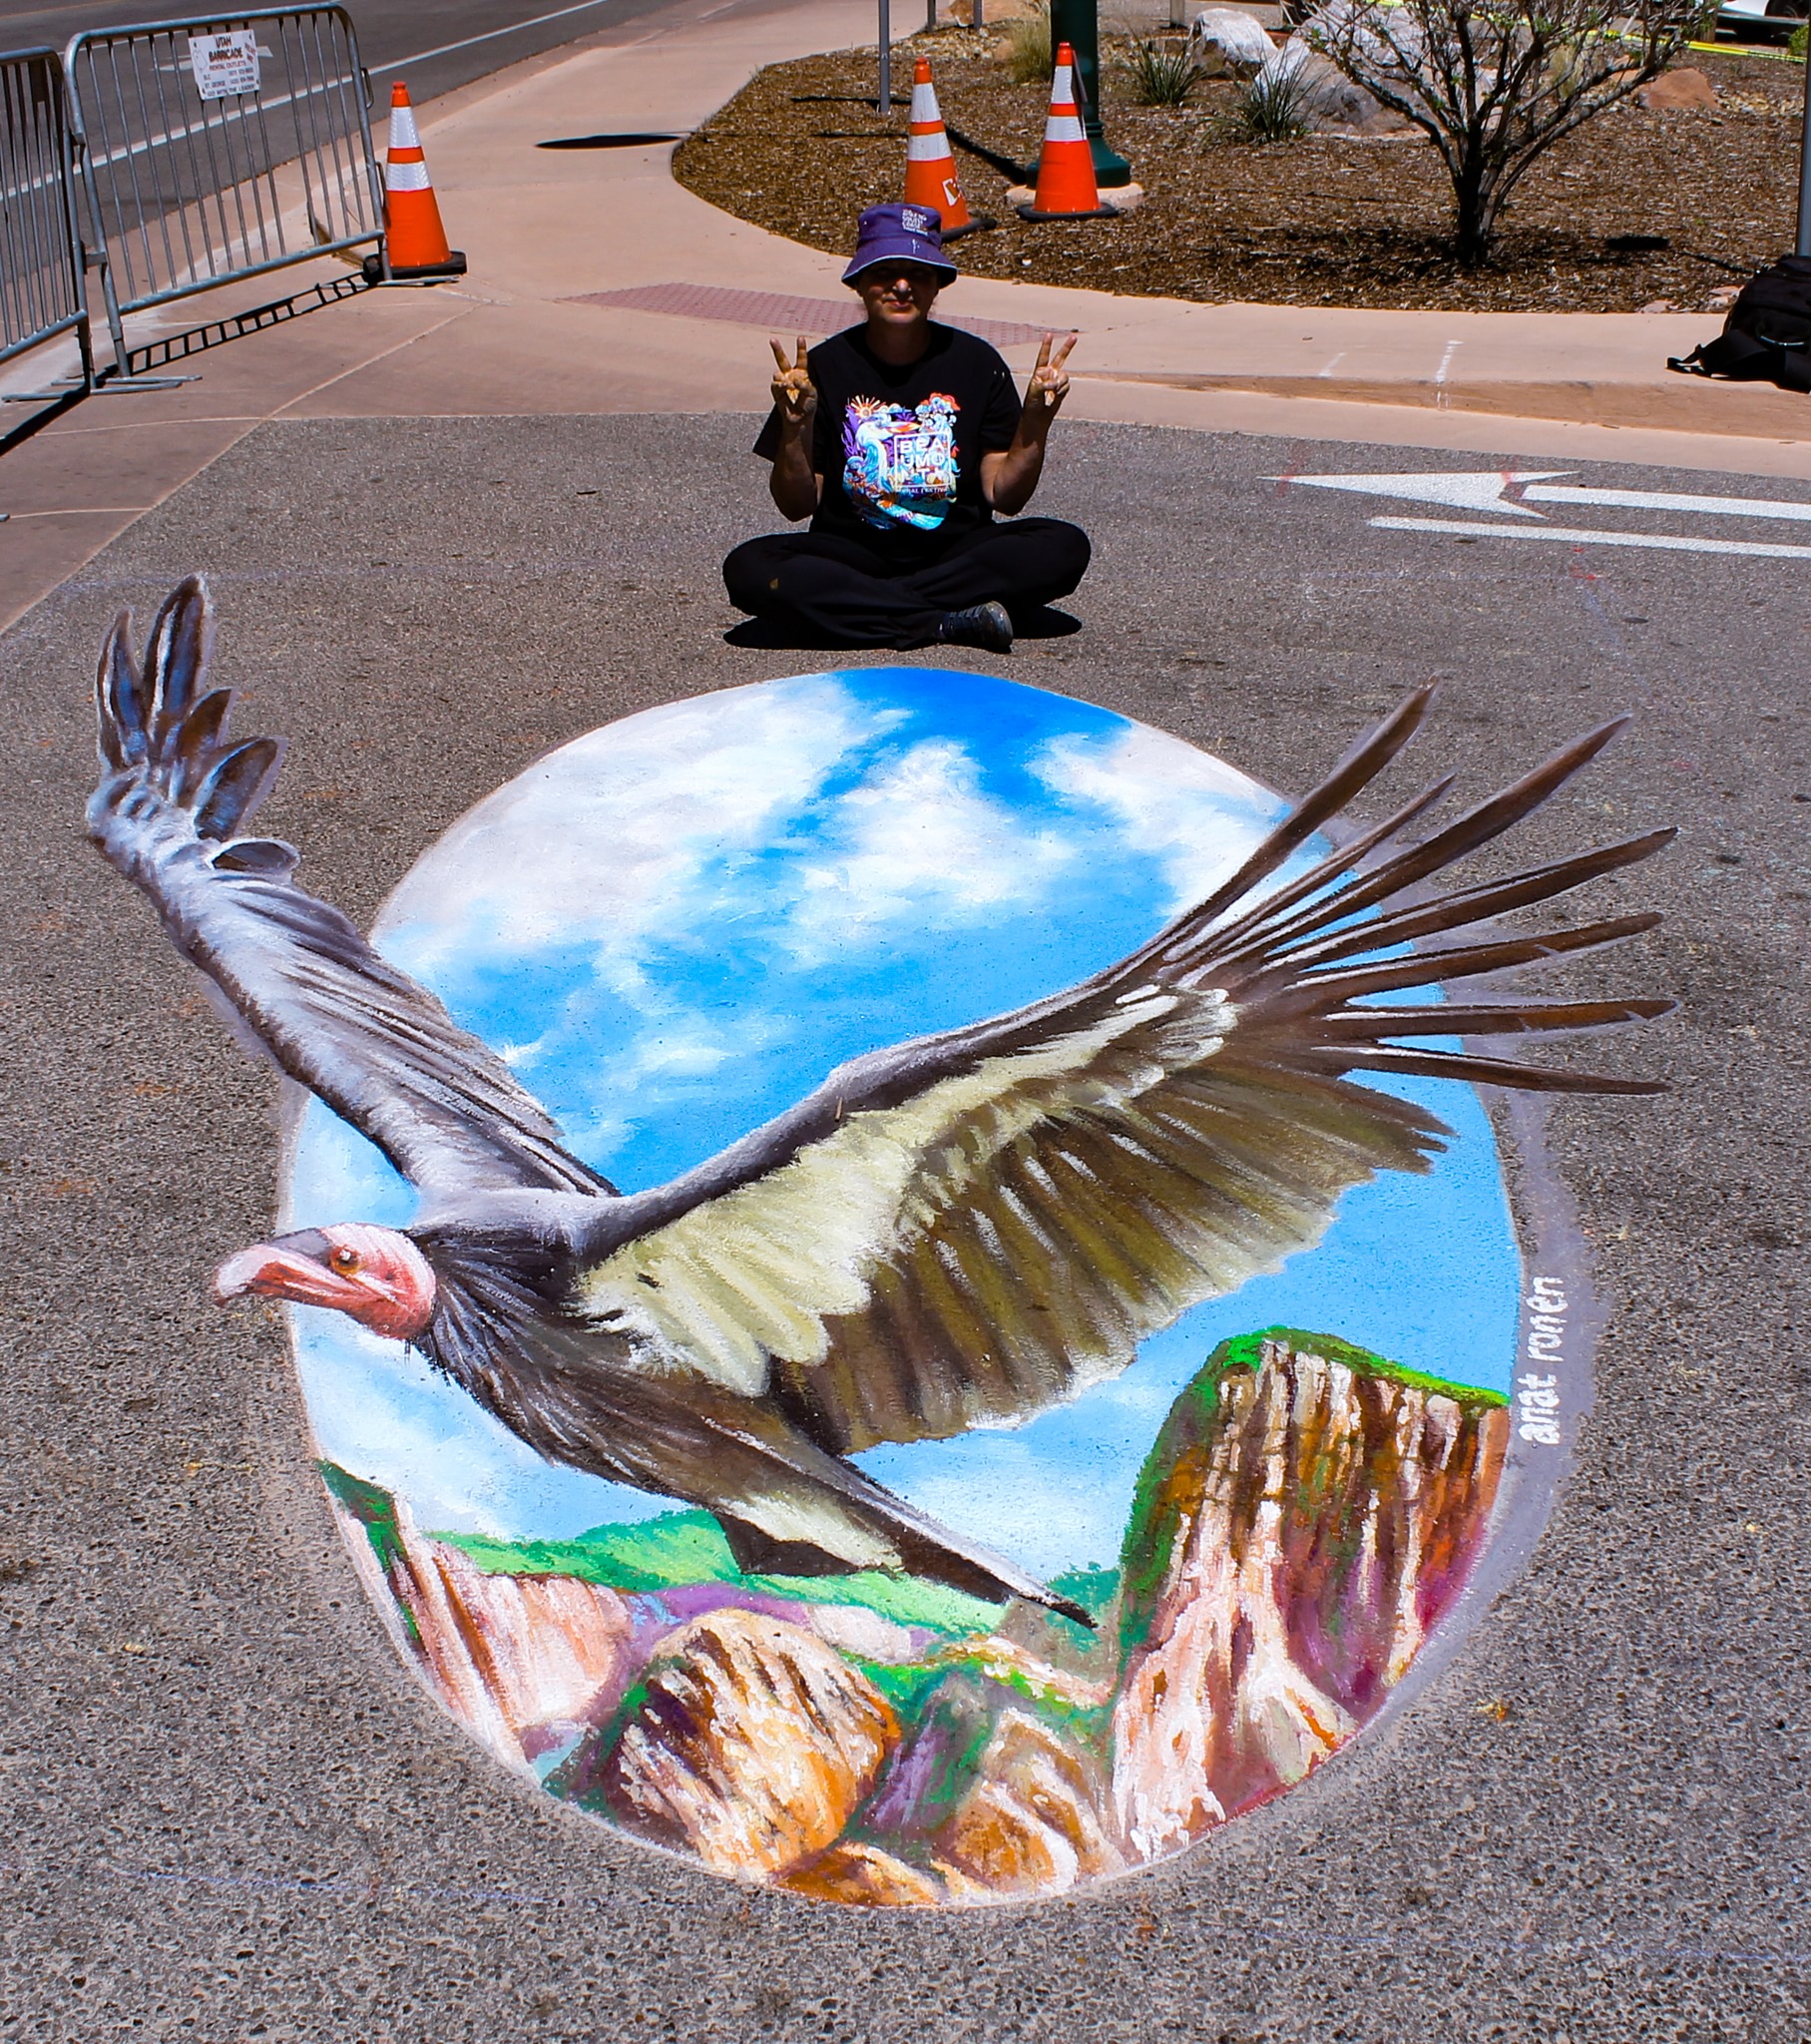 Zion Chalk and Earth Fest